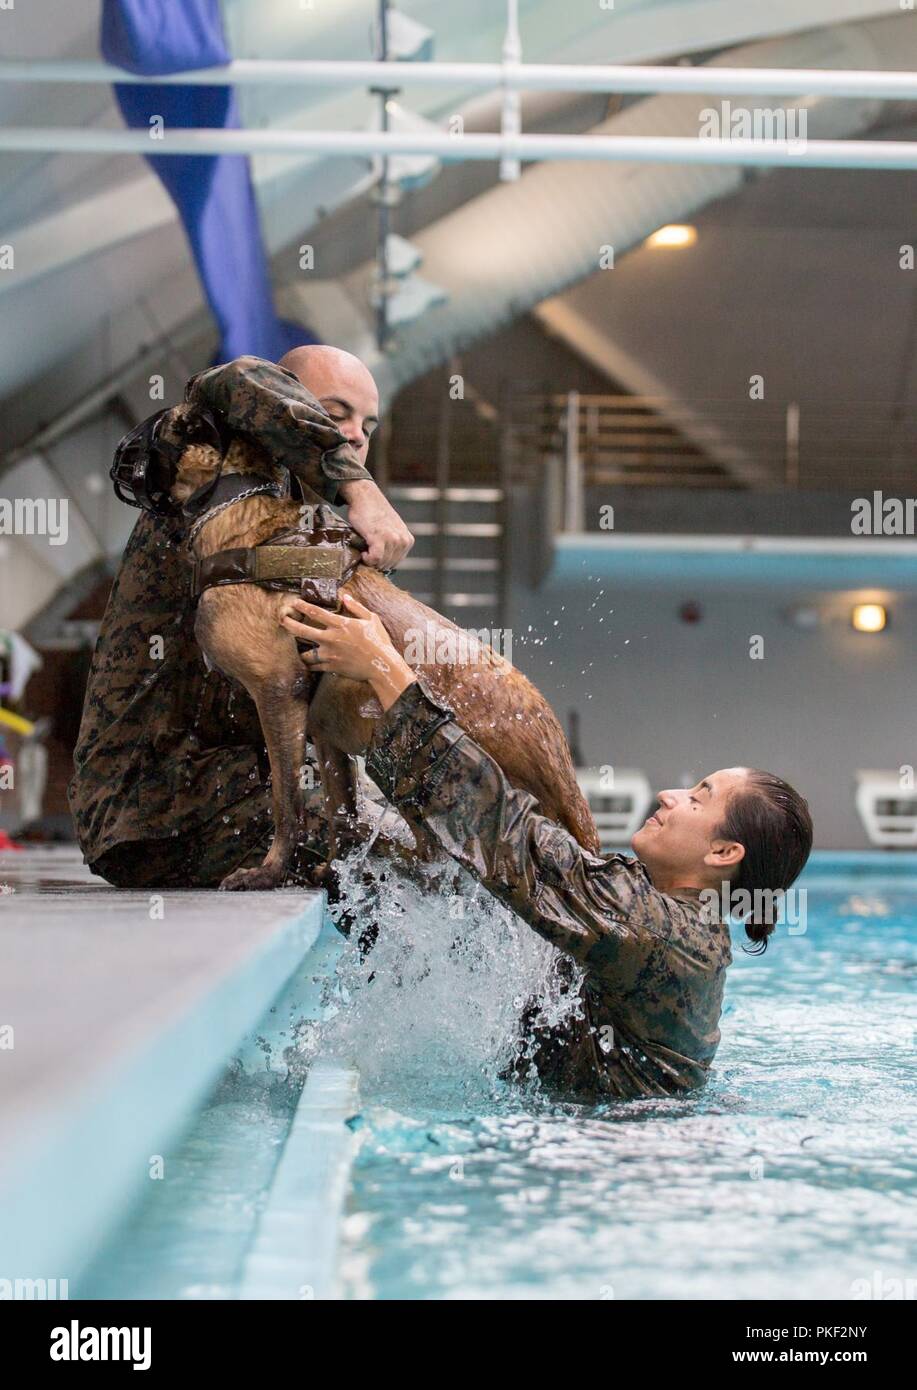 Lance Cpl. Victoria Acosta, a 2nd Law Enforcement Battalion military working dog-handler, helps her dog, Bella, out of the water, in the Area 5 pool at Marine Corps Base Camp Lejeune, N.C., Aug. 3, 2018. 2nd LEB practiced aggression training as part of specialized training to familiarize their dogs with water. The 2nd LEB military working dogs benefit from this particular type of training due to not being exposed to water tactics during initial training periods and become better accustomed to performing duties in atypical situations. Stock Photo